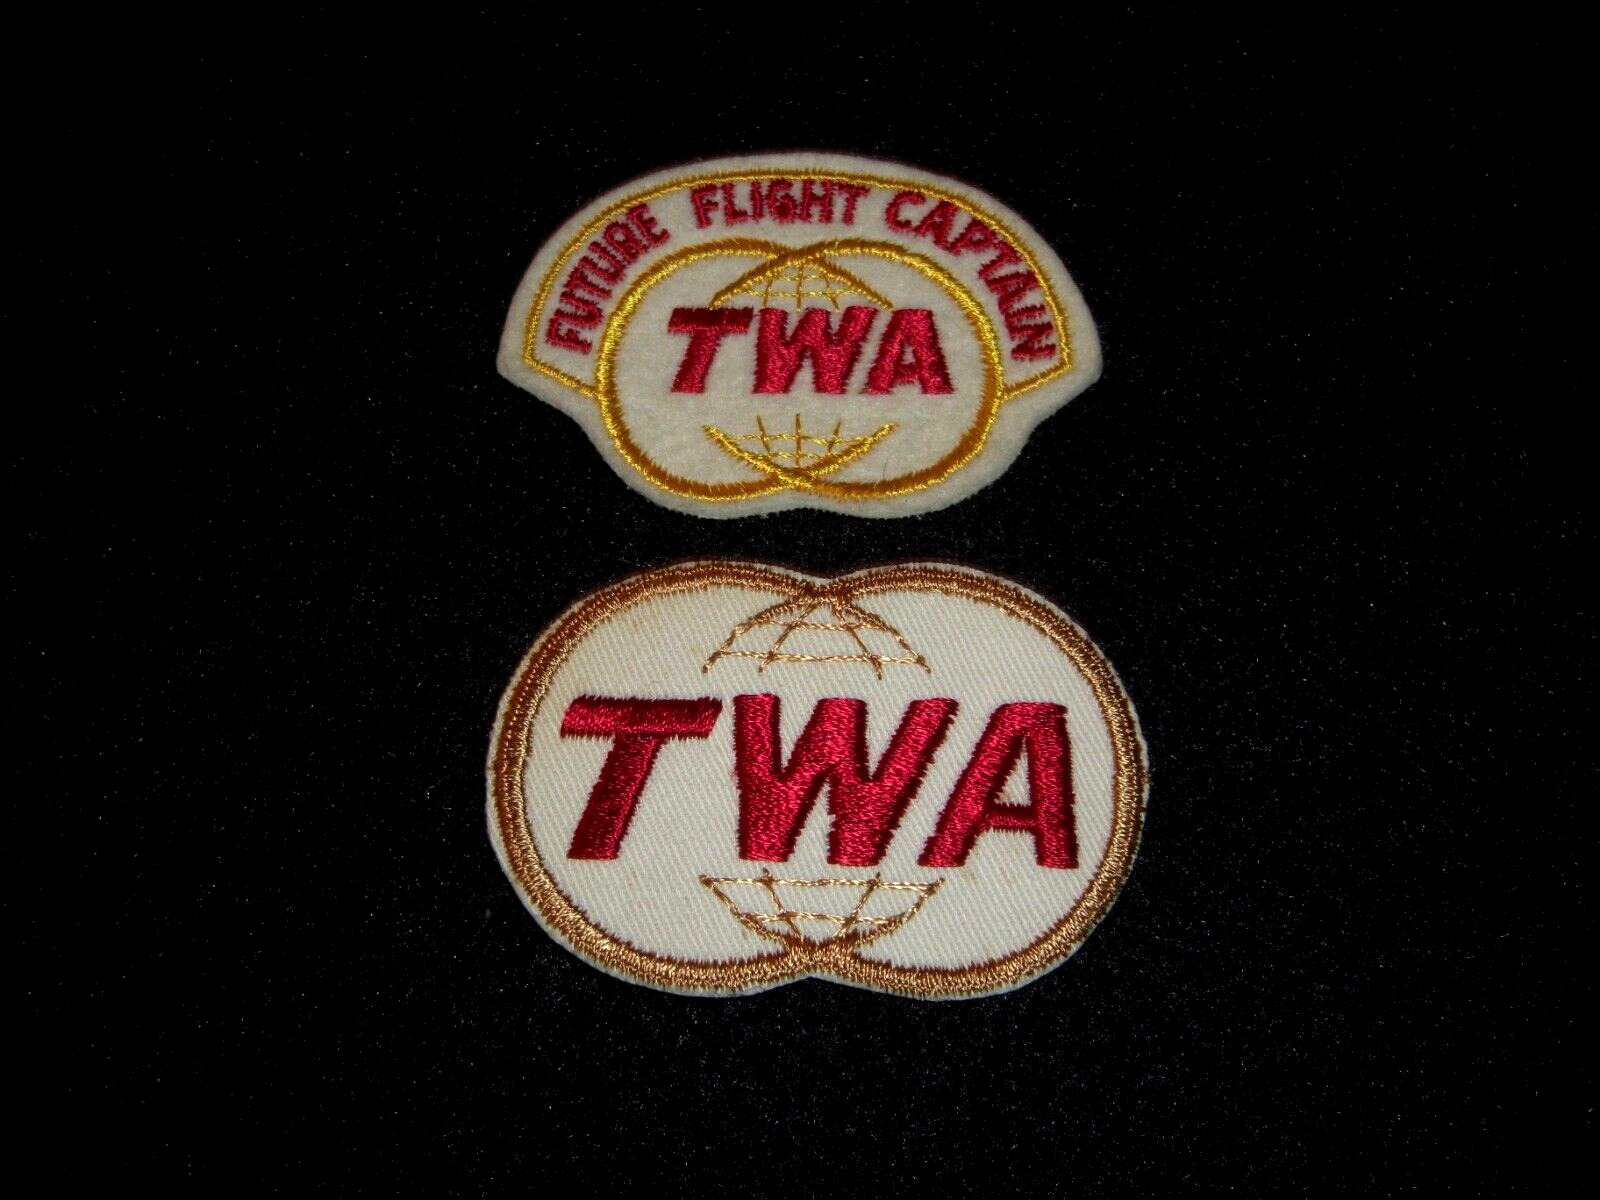 Future Flight Captain TWA  and a TWA  Airlines Patch  1950\'s -1960\'s Original